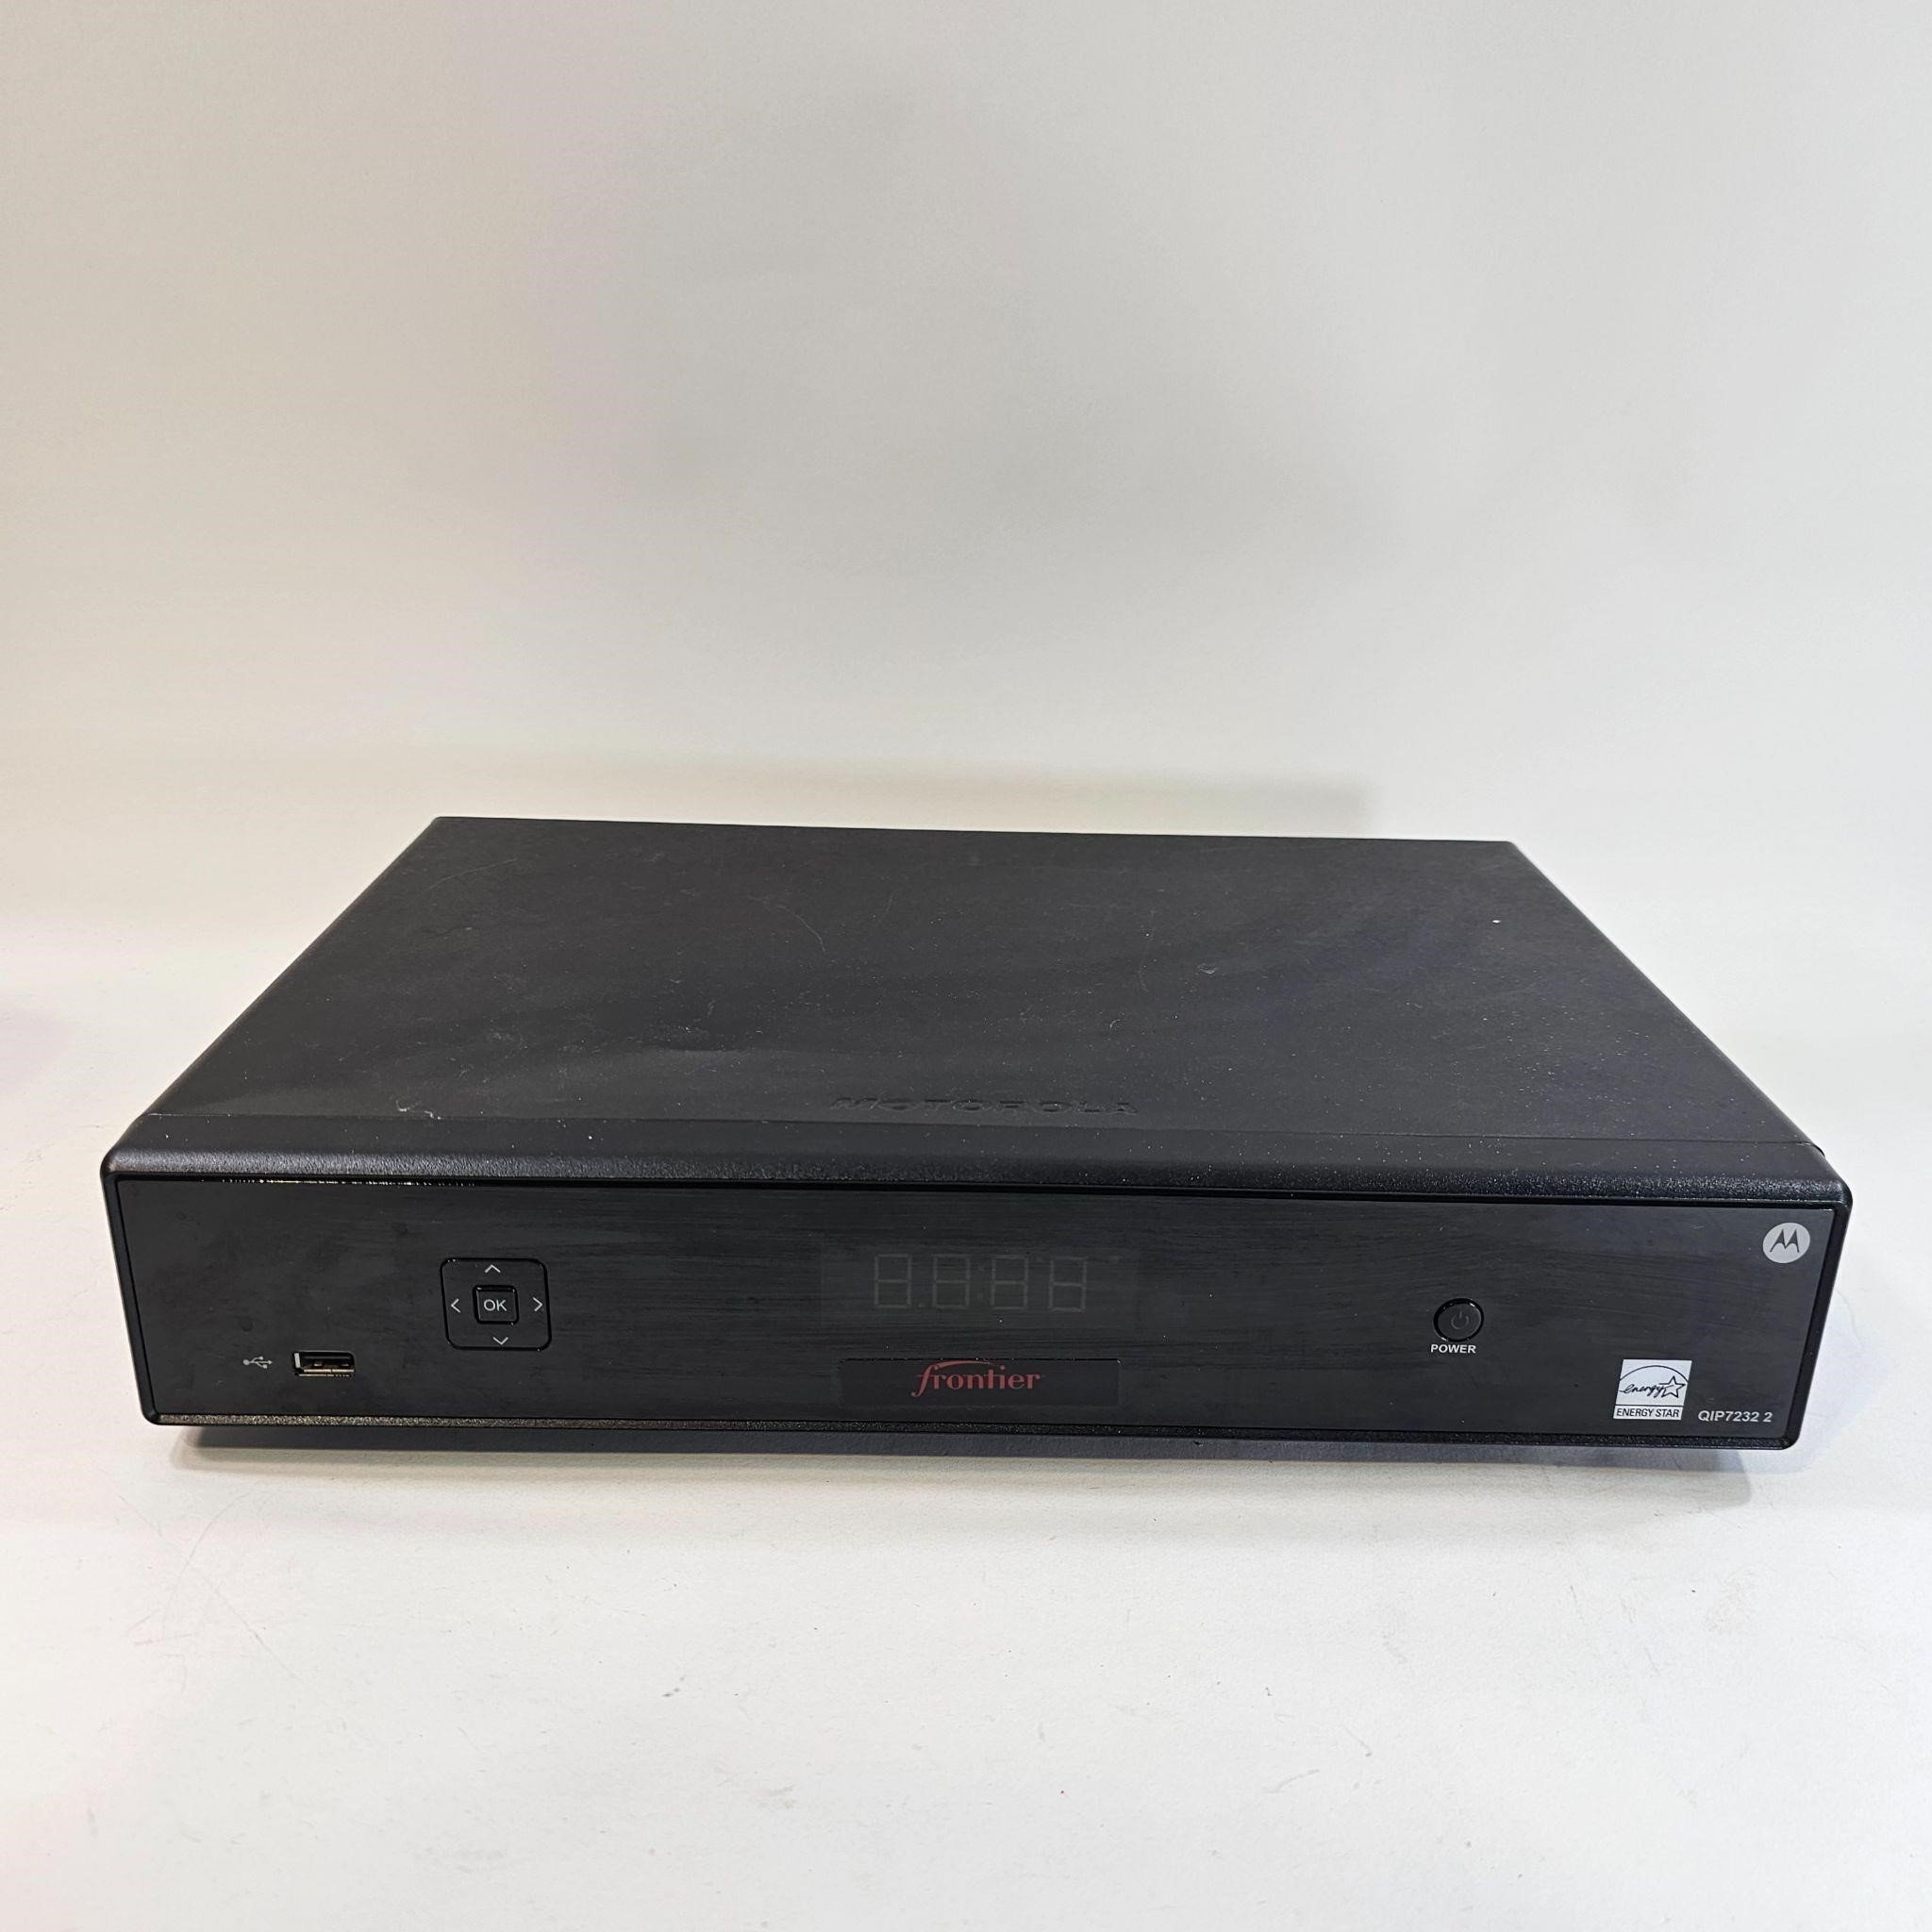 Frontier QIP7232 Cable Box